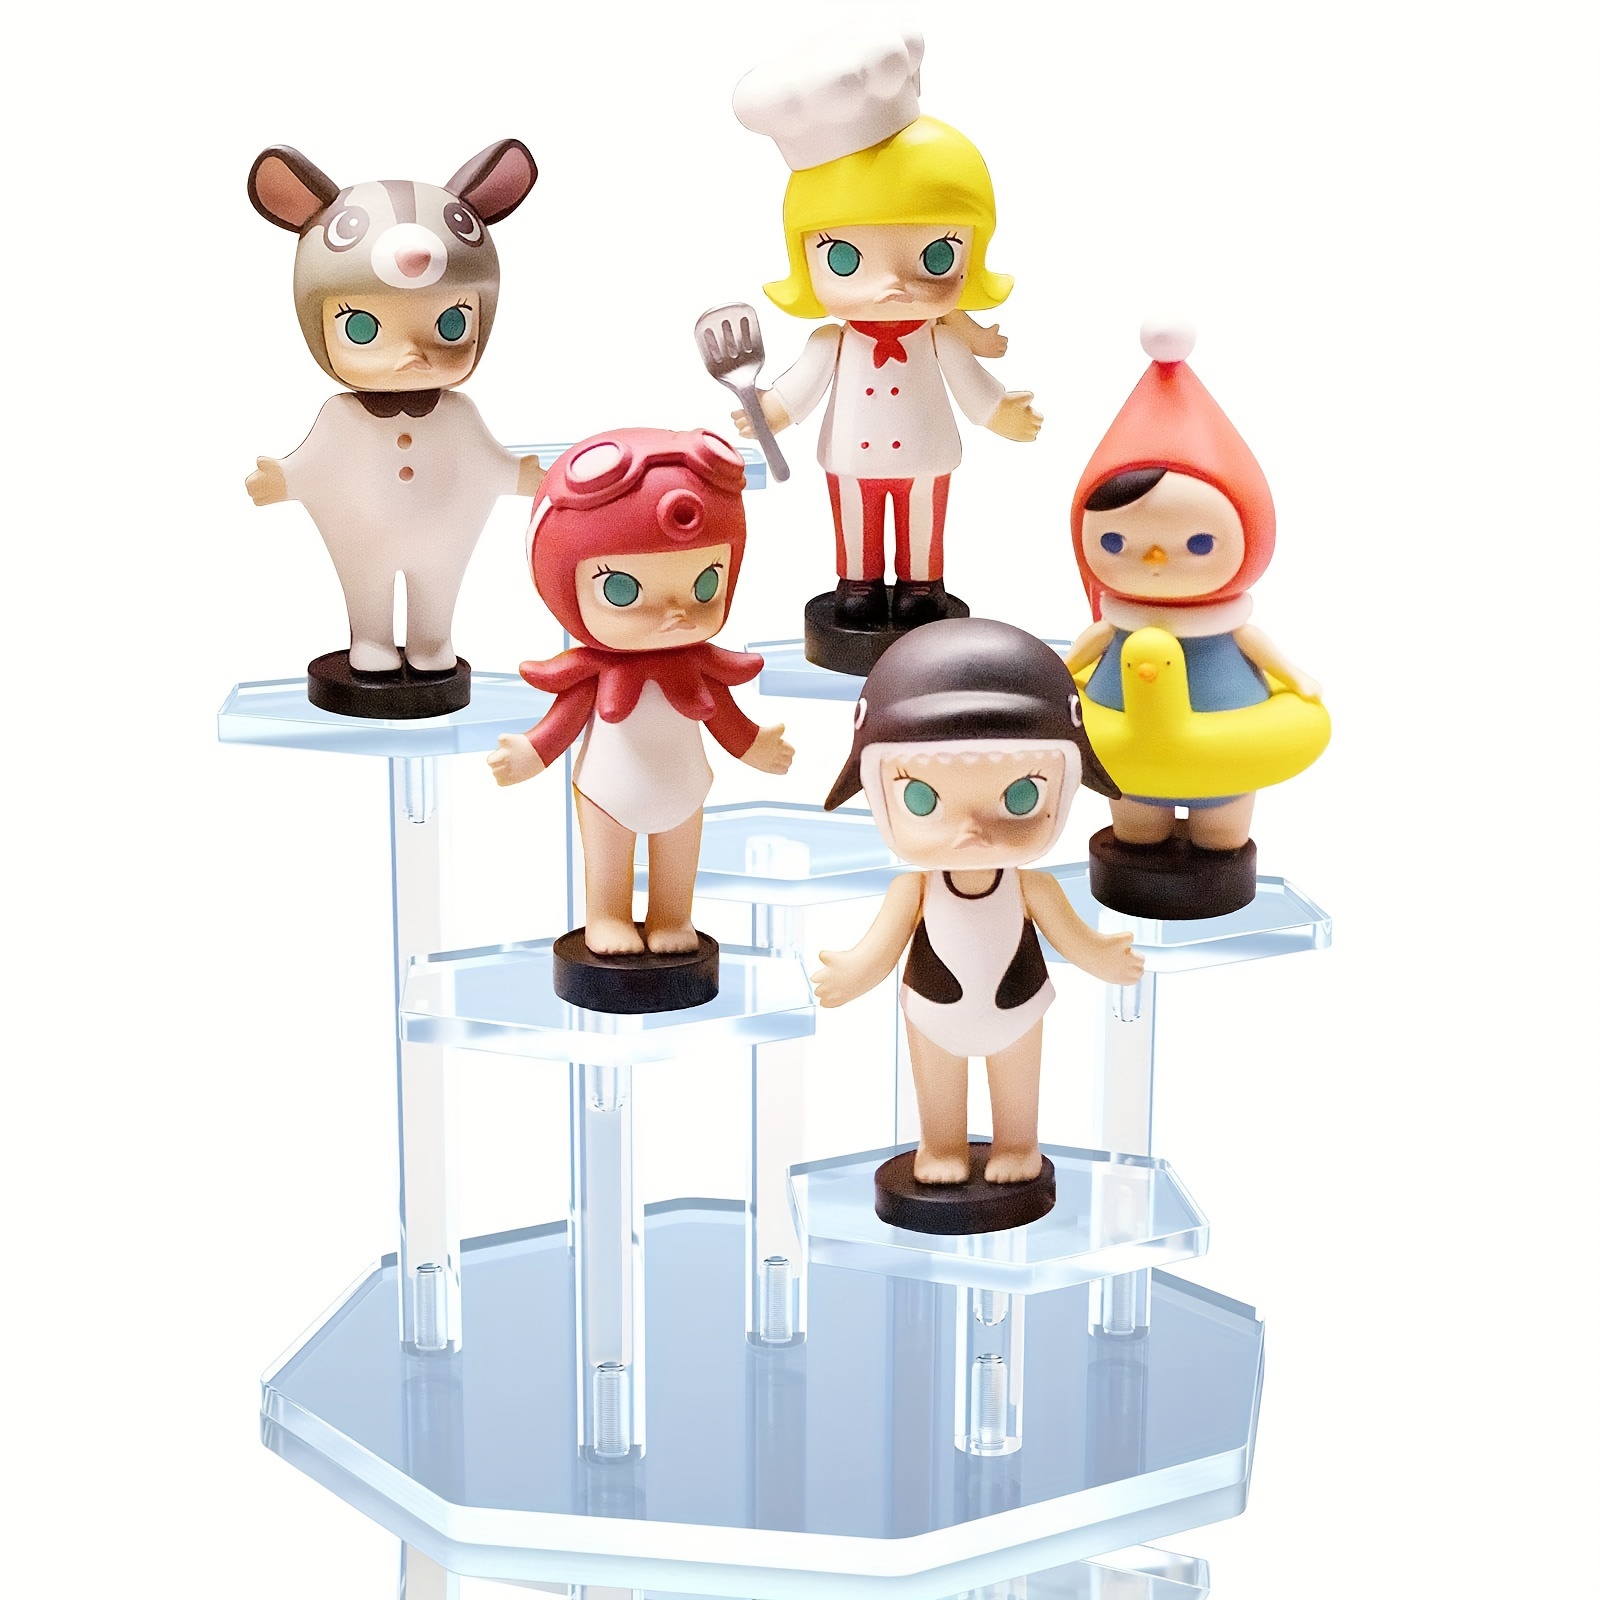 

1pc Acrylic Display Stand For Figures, Collectibles, Toys And Dolls, Jewelry, Action Figures Collection Organizer Holder, Collectibles Stand, Cosmetic Items Risers, 7-tier